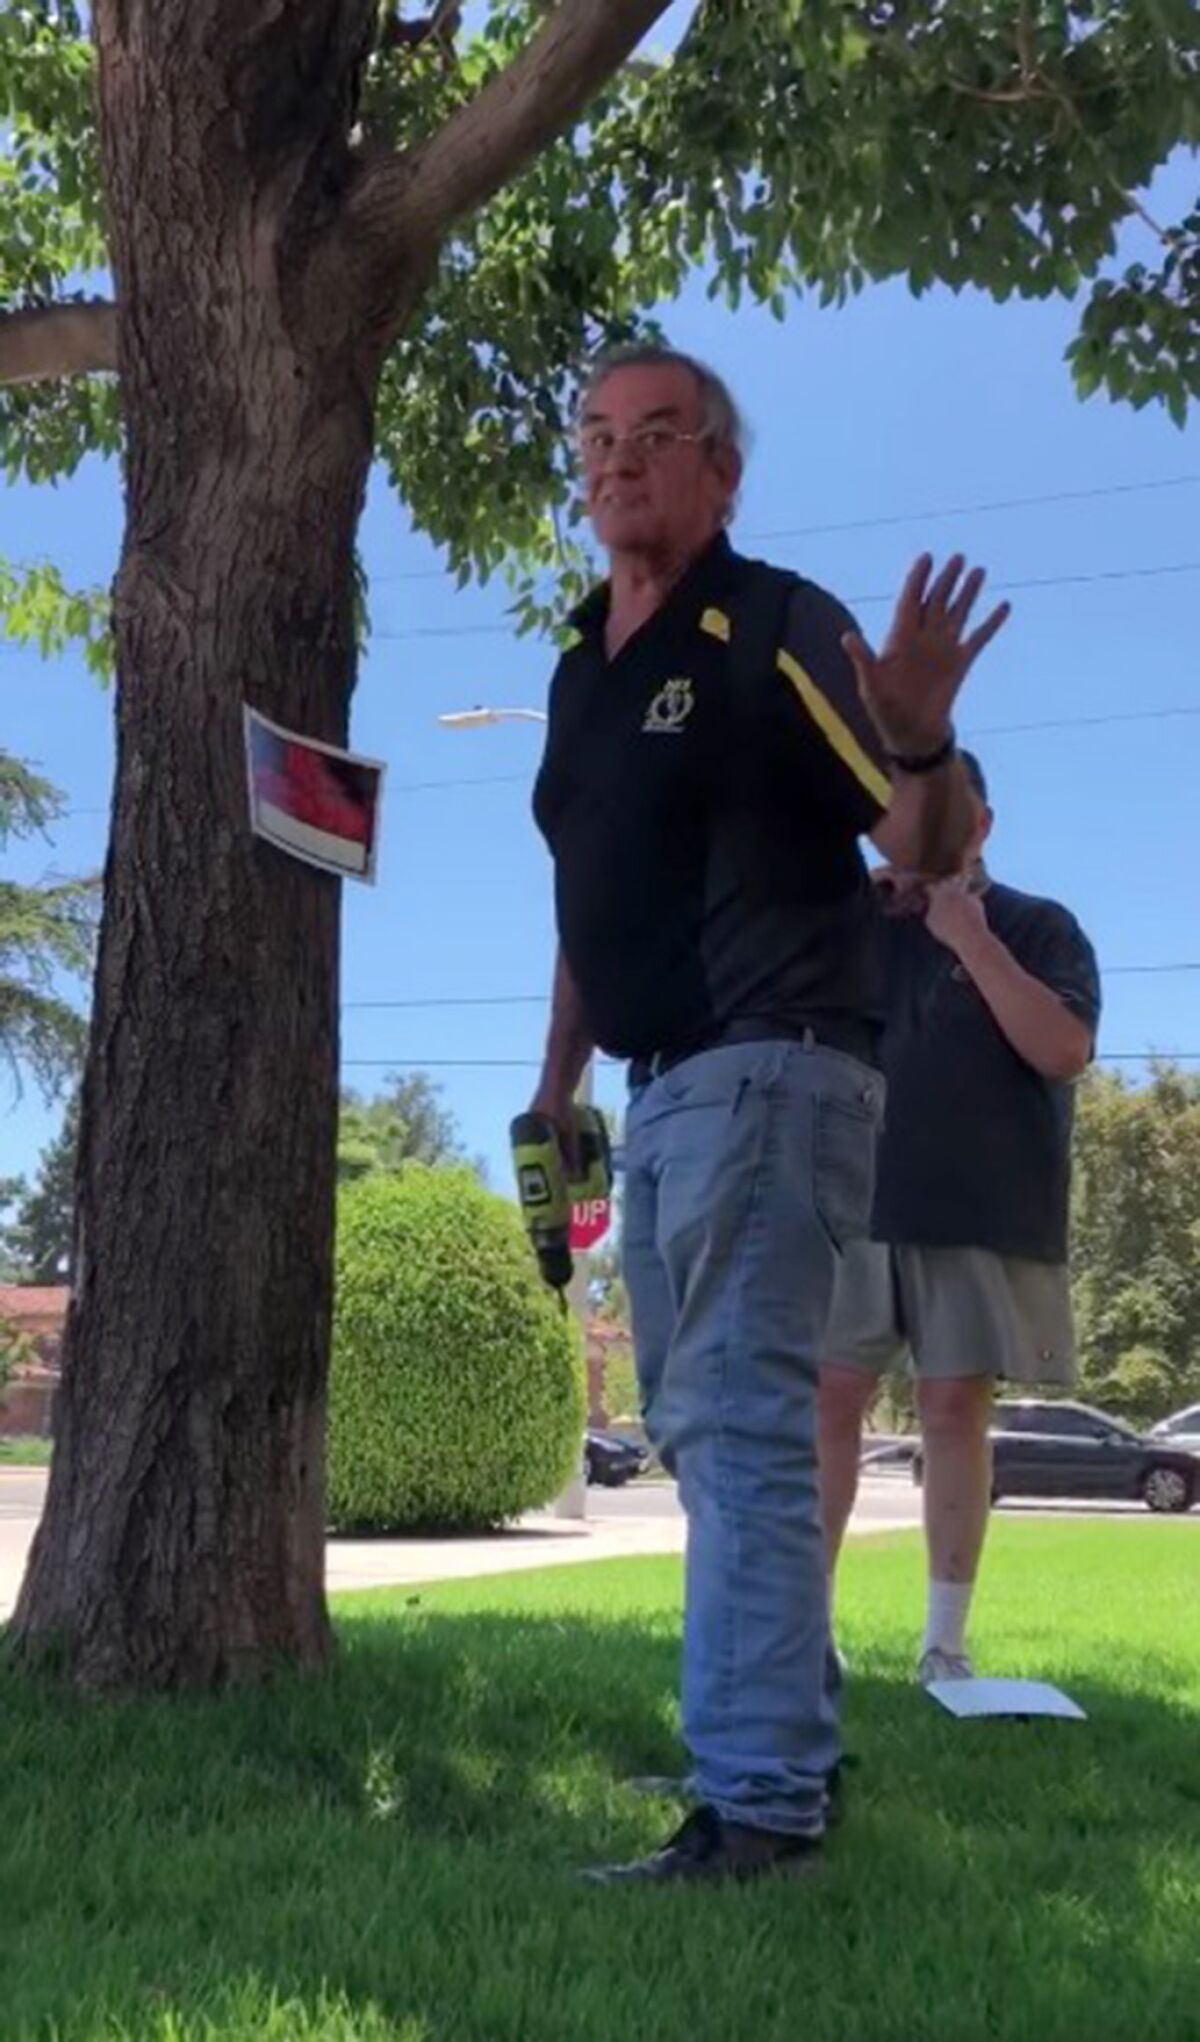 A screengrab from an iPhone video shows a man telling Marshall-Brown to leave after posting a "No Trespassing" sign.